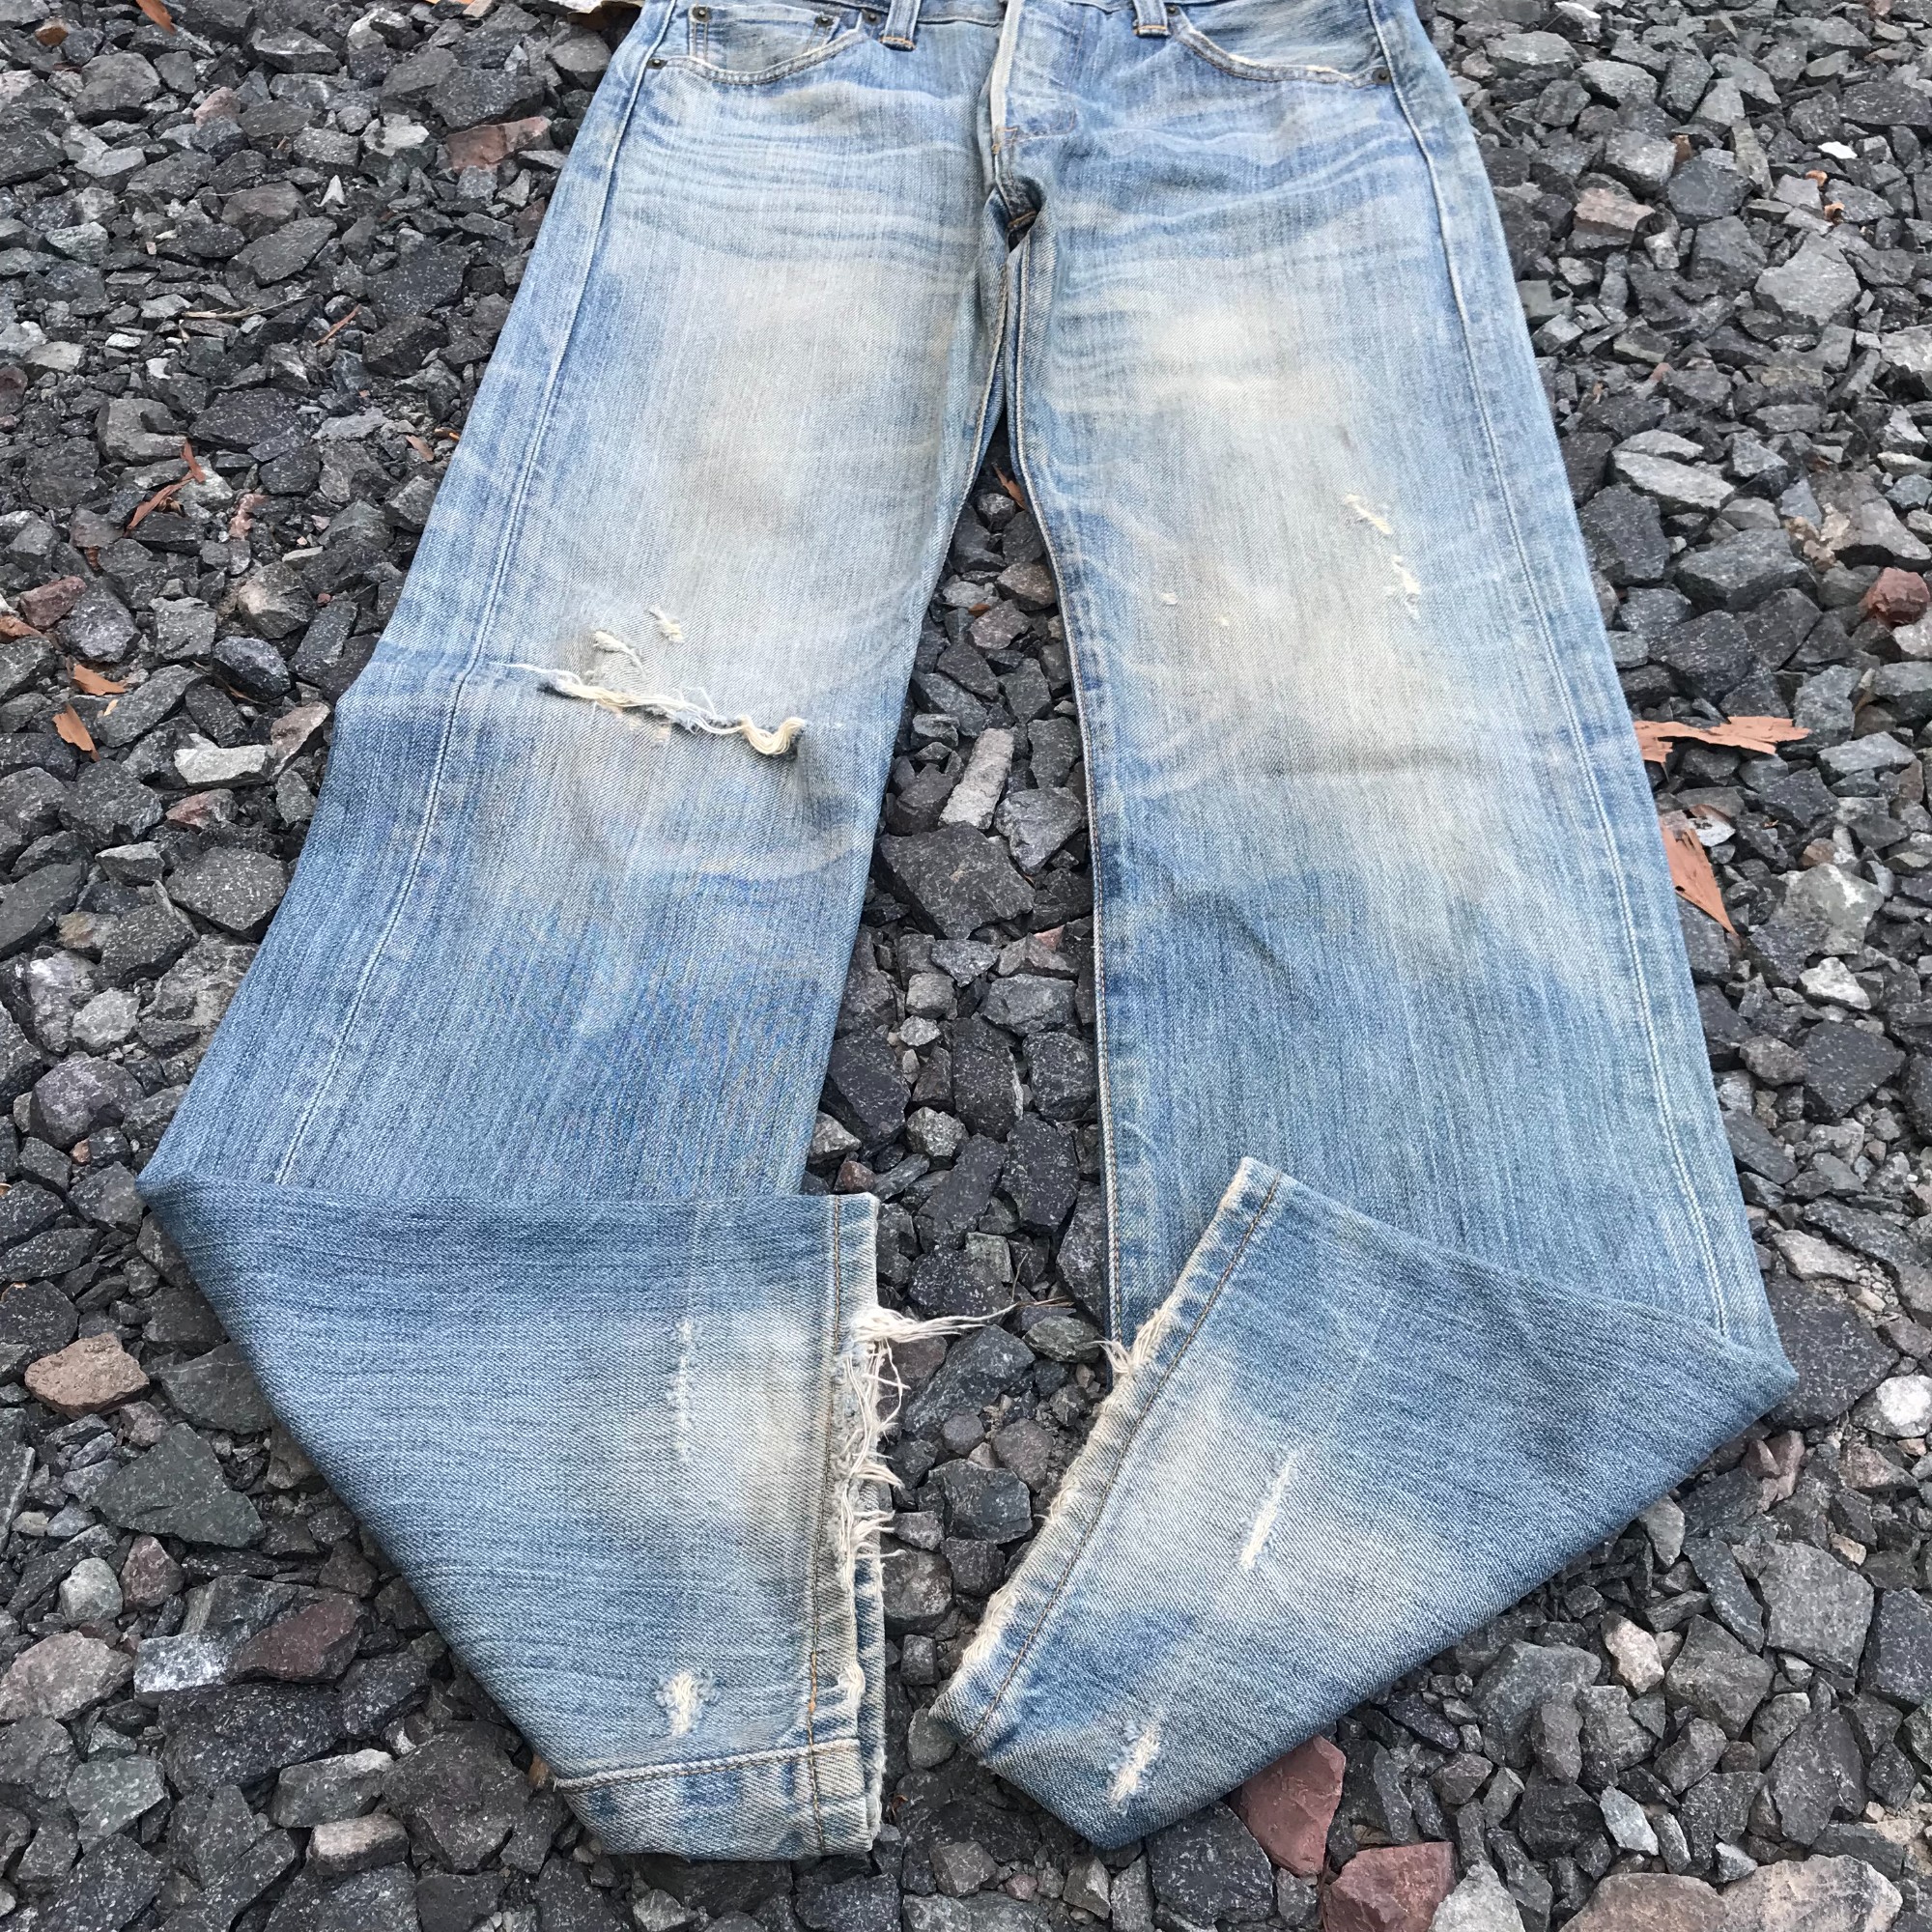 Vintage Levis 501 faded Distressed denim Waist 30x32 inch trashed ripped kurt cobain style - 3